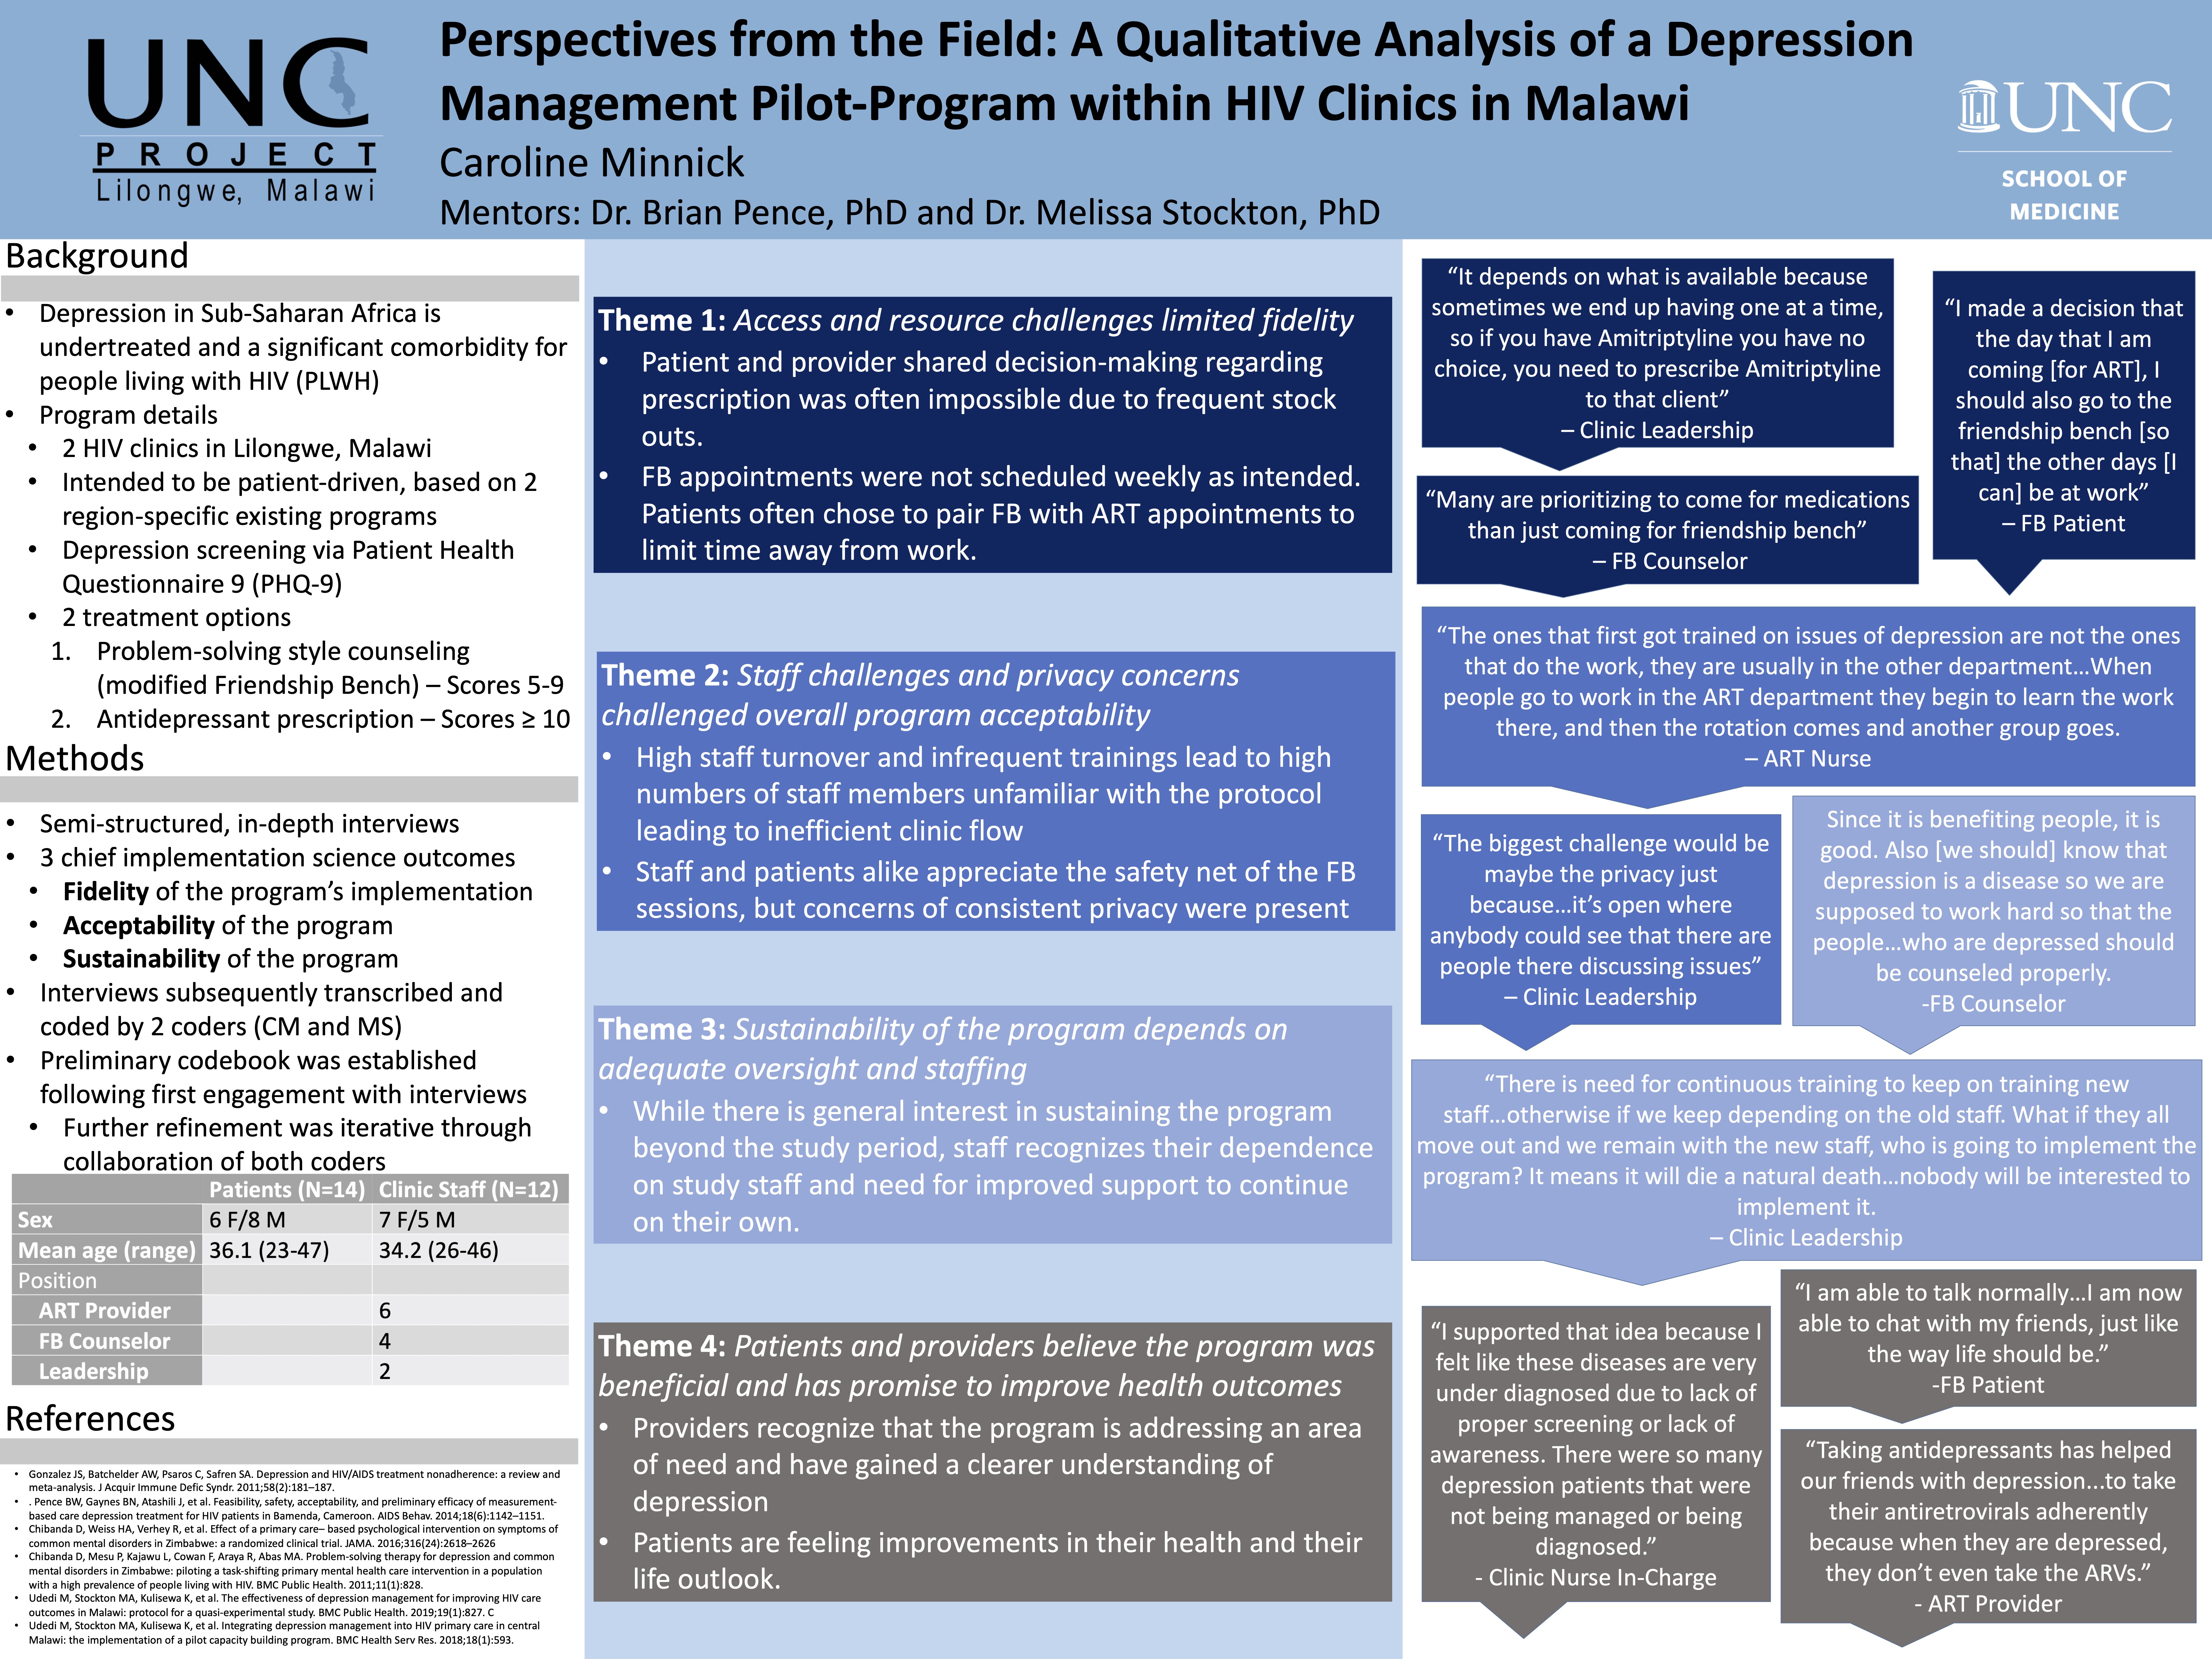 Showcase Image for Perspectives from the Field: A Qualitative Analysis of a Depression Management Pilot- Program within HIV Clinics in Malawi